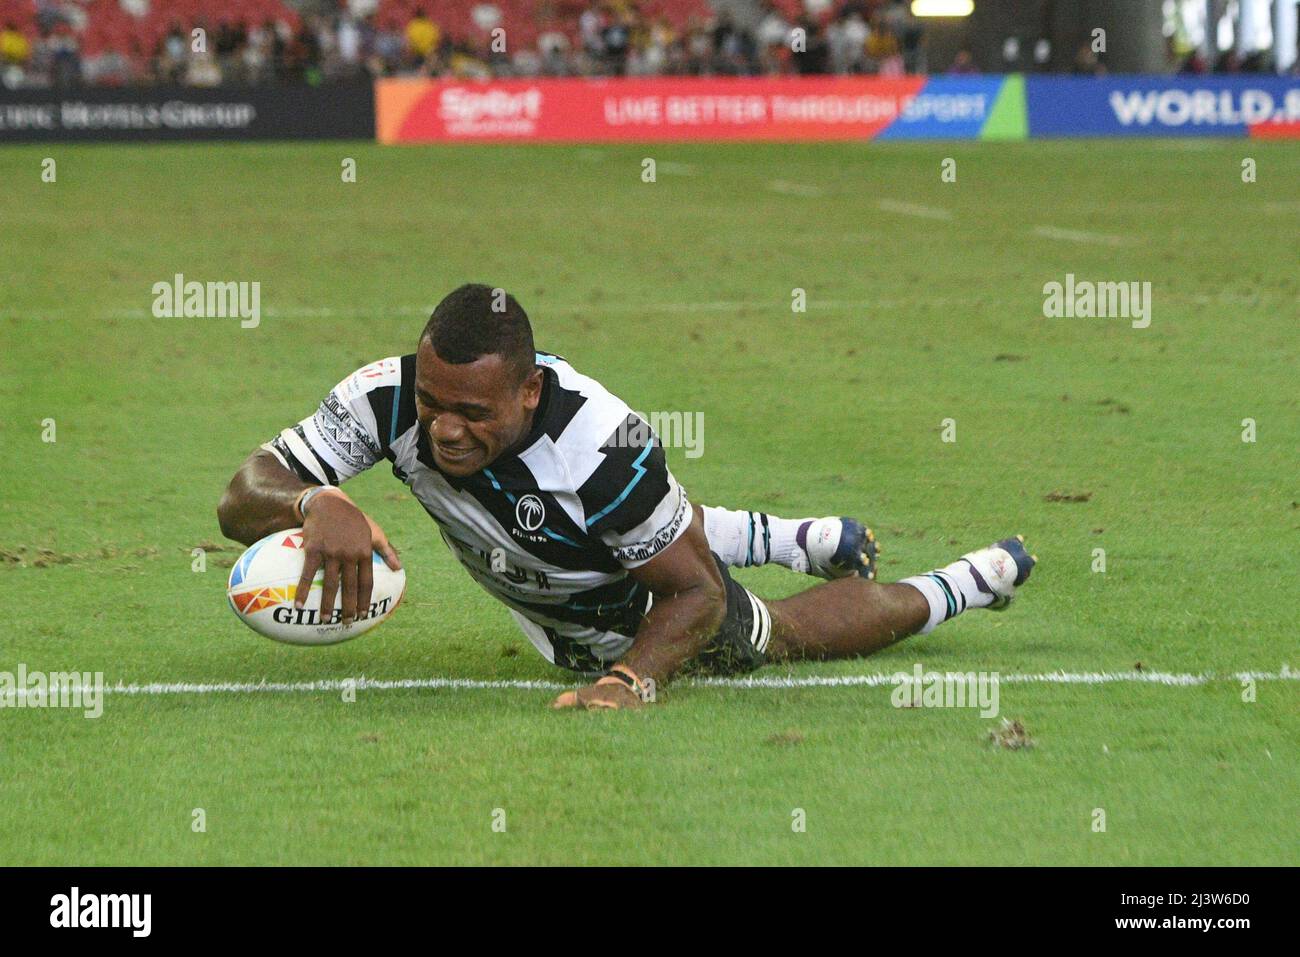 Singapore. 10th Apr, 2022. Elia Canakaivata of Fiji scores a try during the semifinal between Australia and Fiji at the HSBC World Rugby Sevens Singapore stop, held in the National Stadium on April 10, 2022. Credit: Then Chih Wey/Xinhua/Alamy Live News Stock Photo